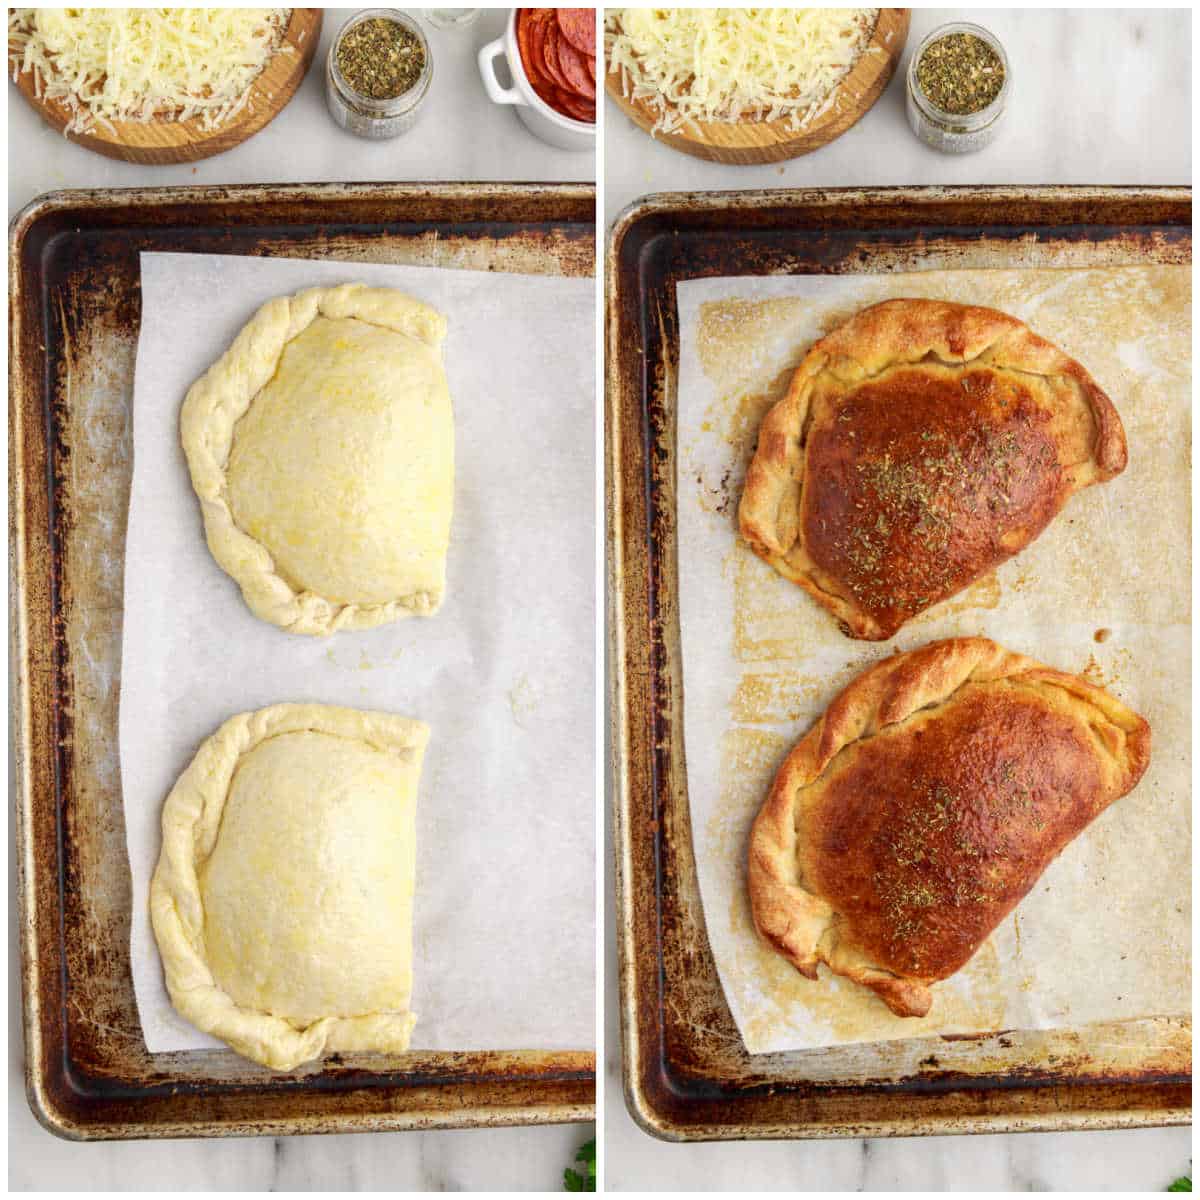 Steps to make meat calzones.